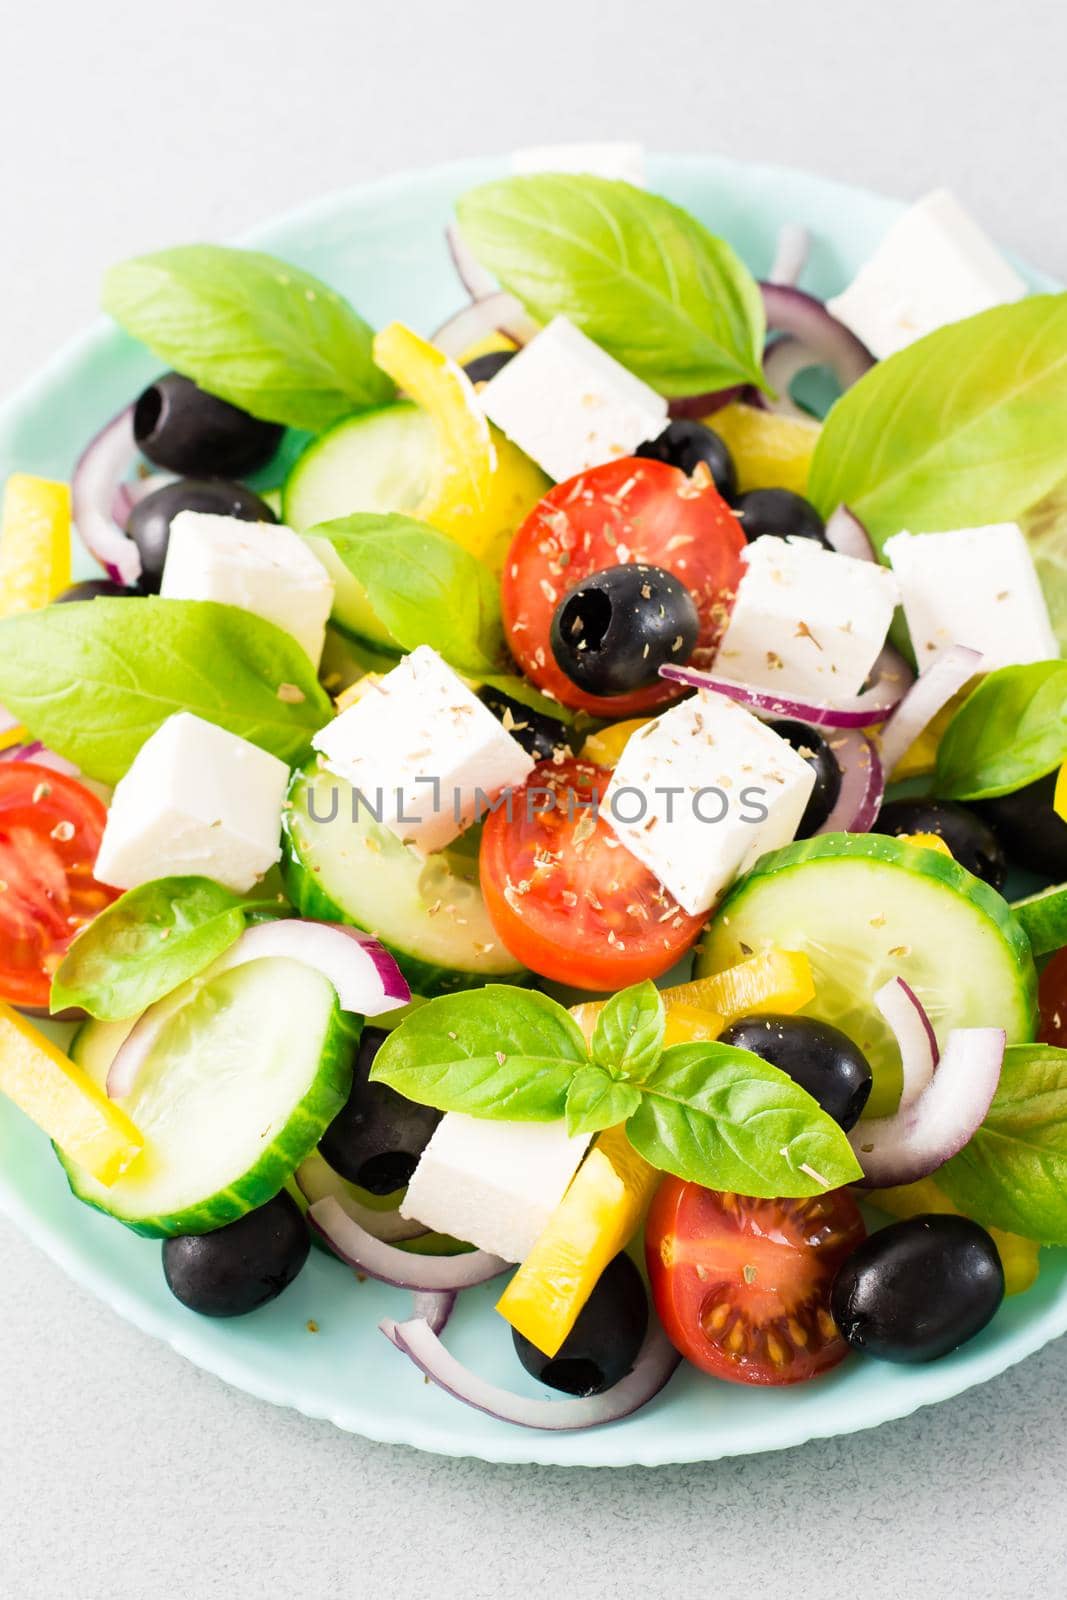 Fresh homemade greek salad with basil leaves on a plate on the table. Domestic life. Vertical view. Close-up by Aleruana